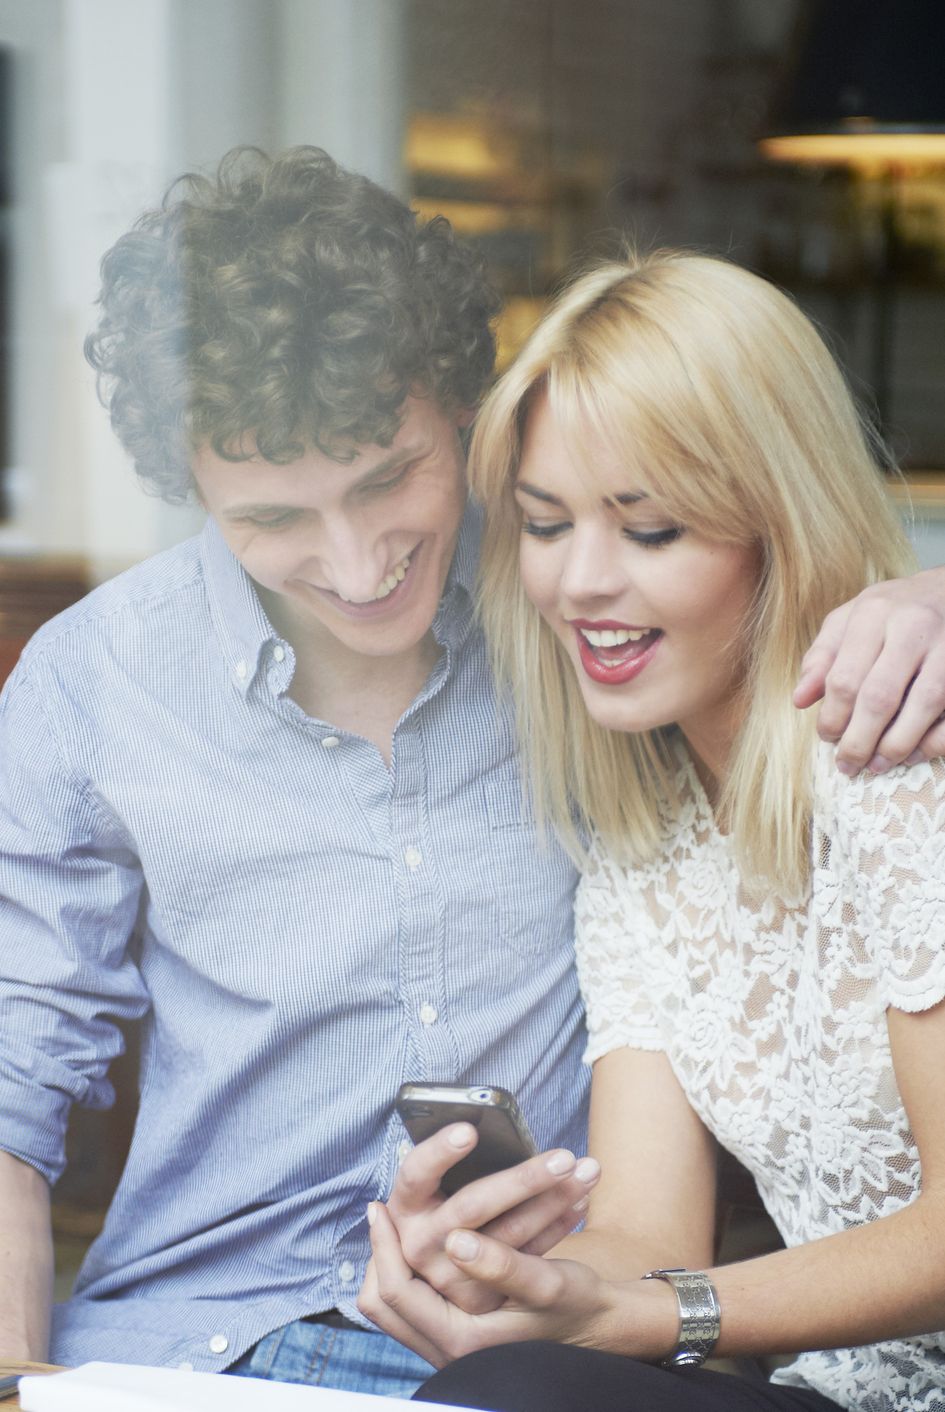 man and woman hugging and looking at mobile phone